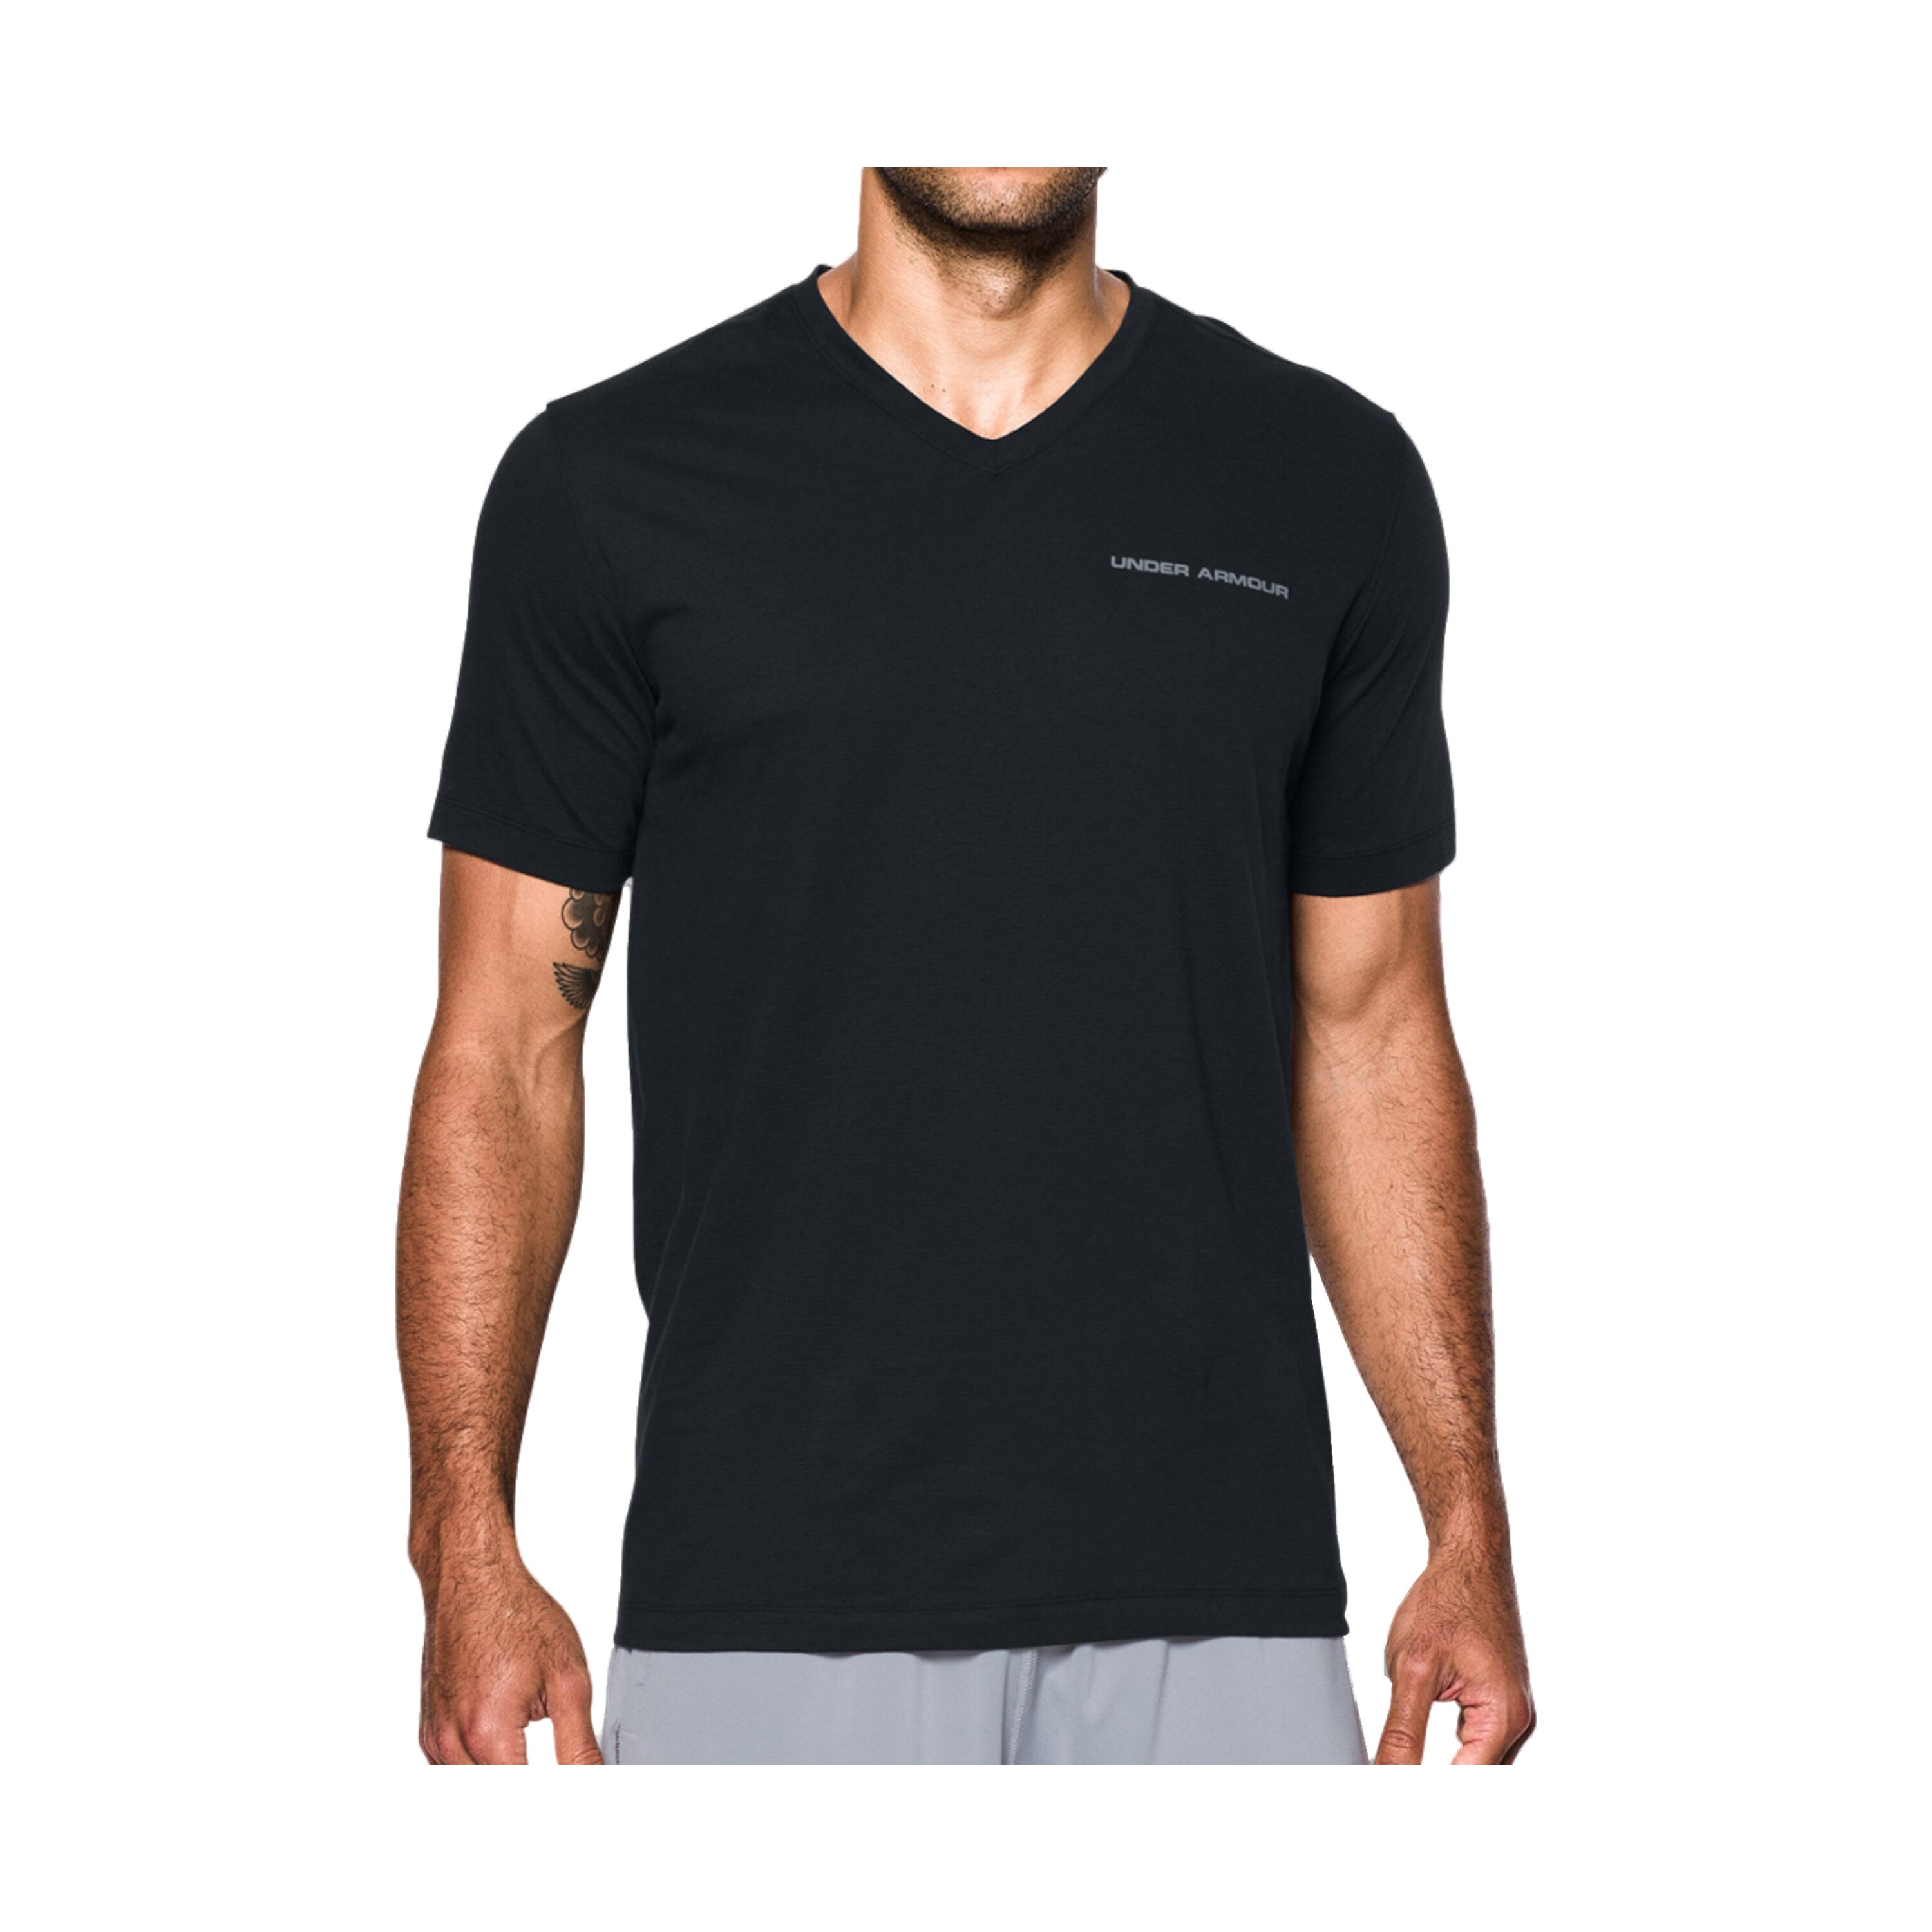 pasta codo valor Under Armour T-Shirt V-Neck Charged Cotton black